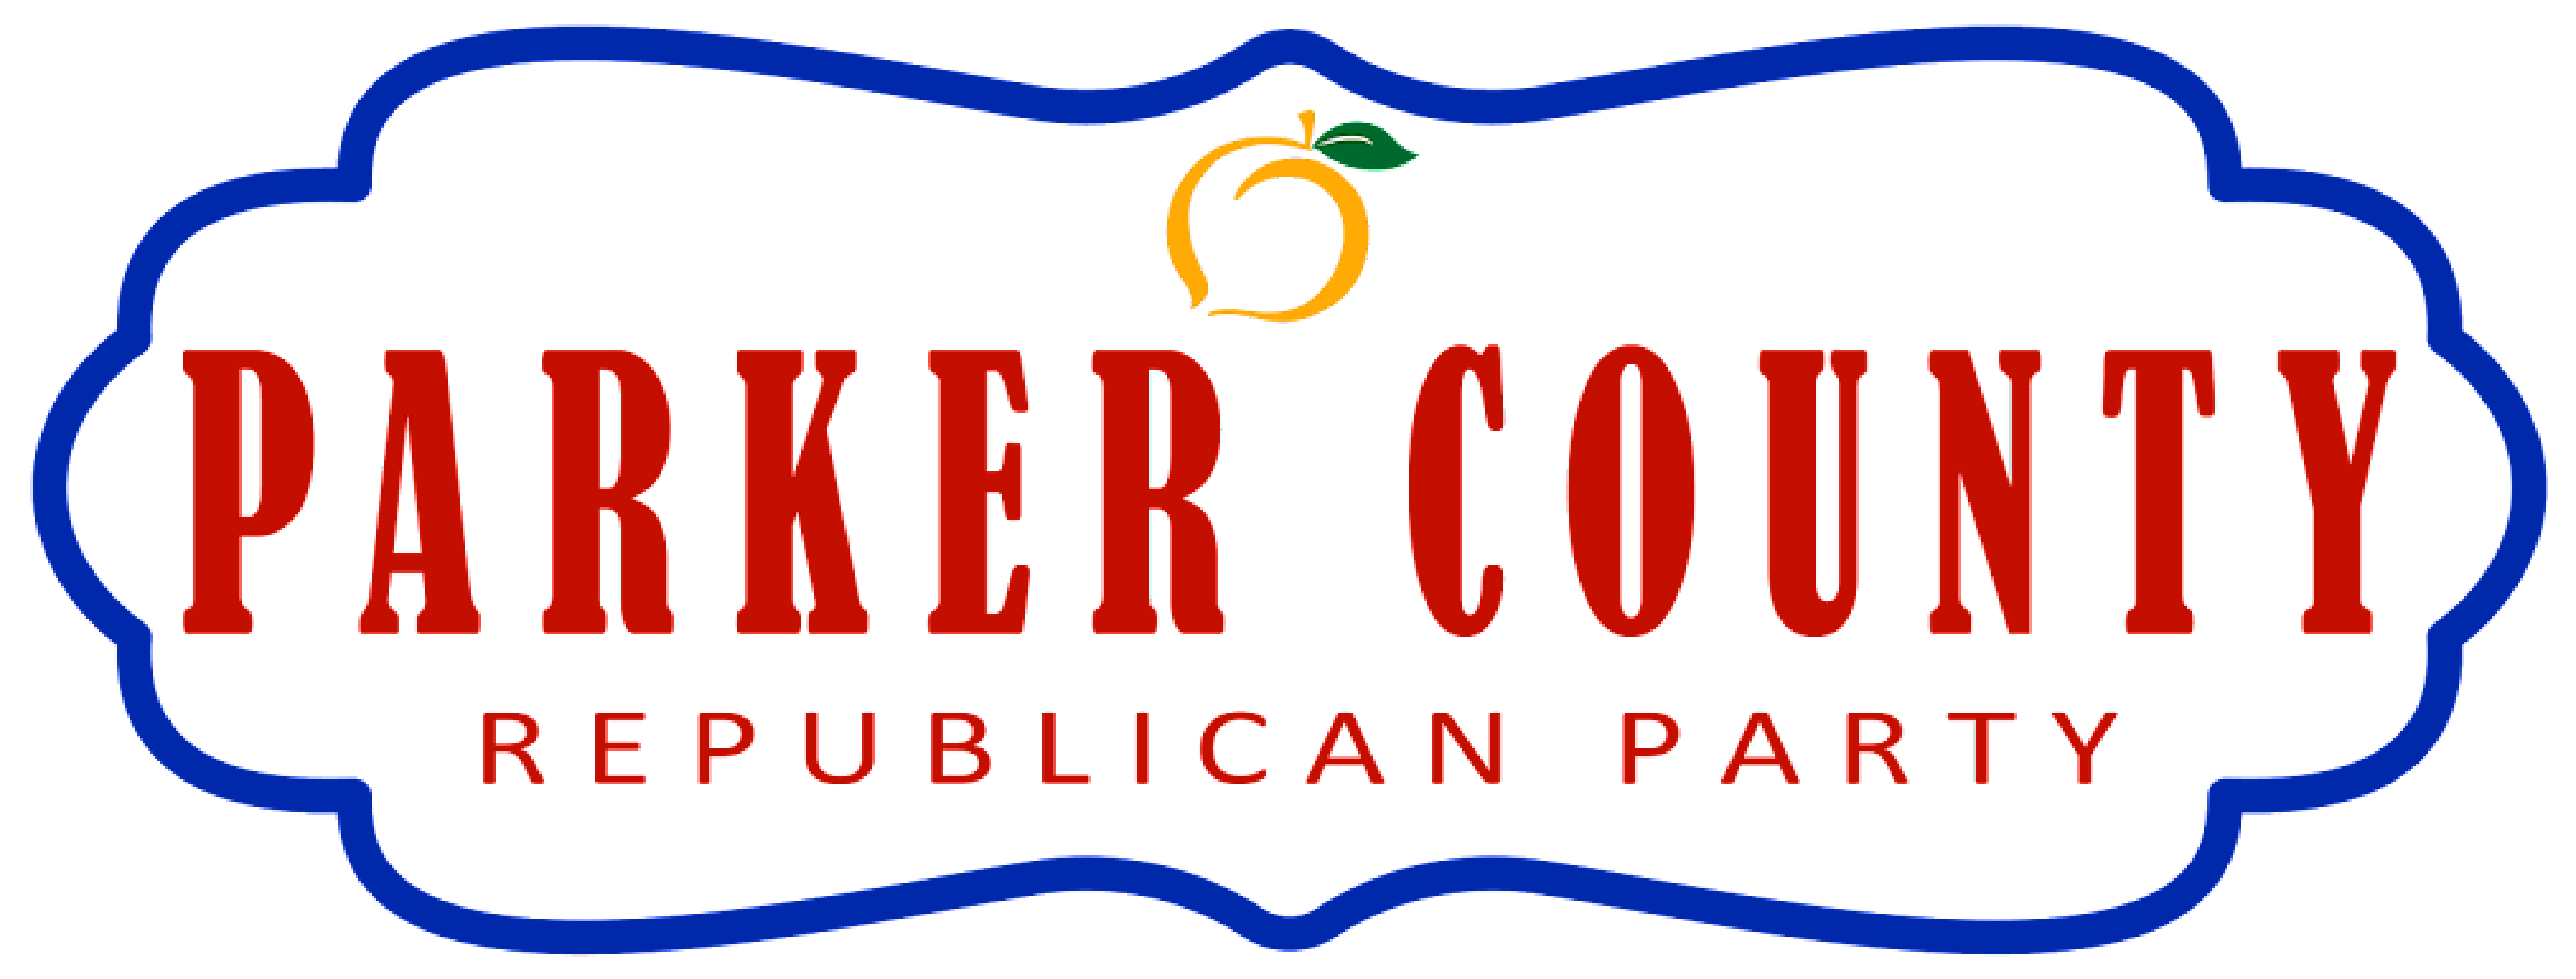 Parker County Republican Party